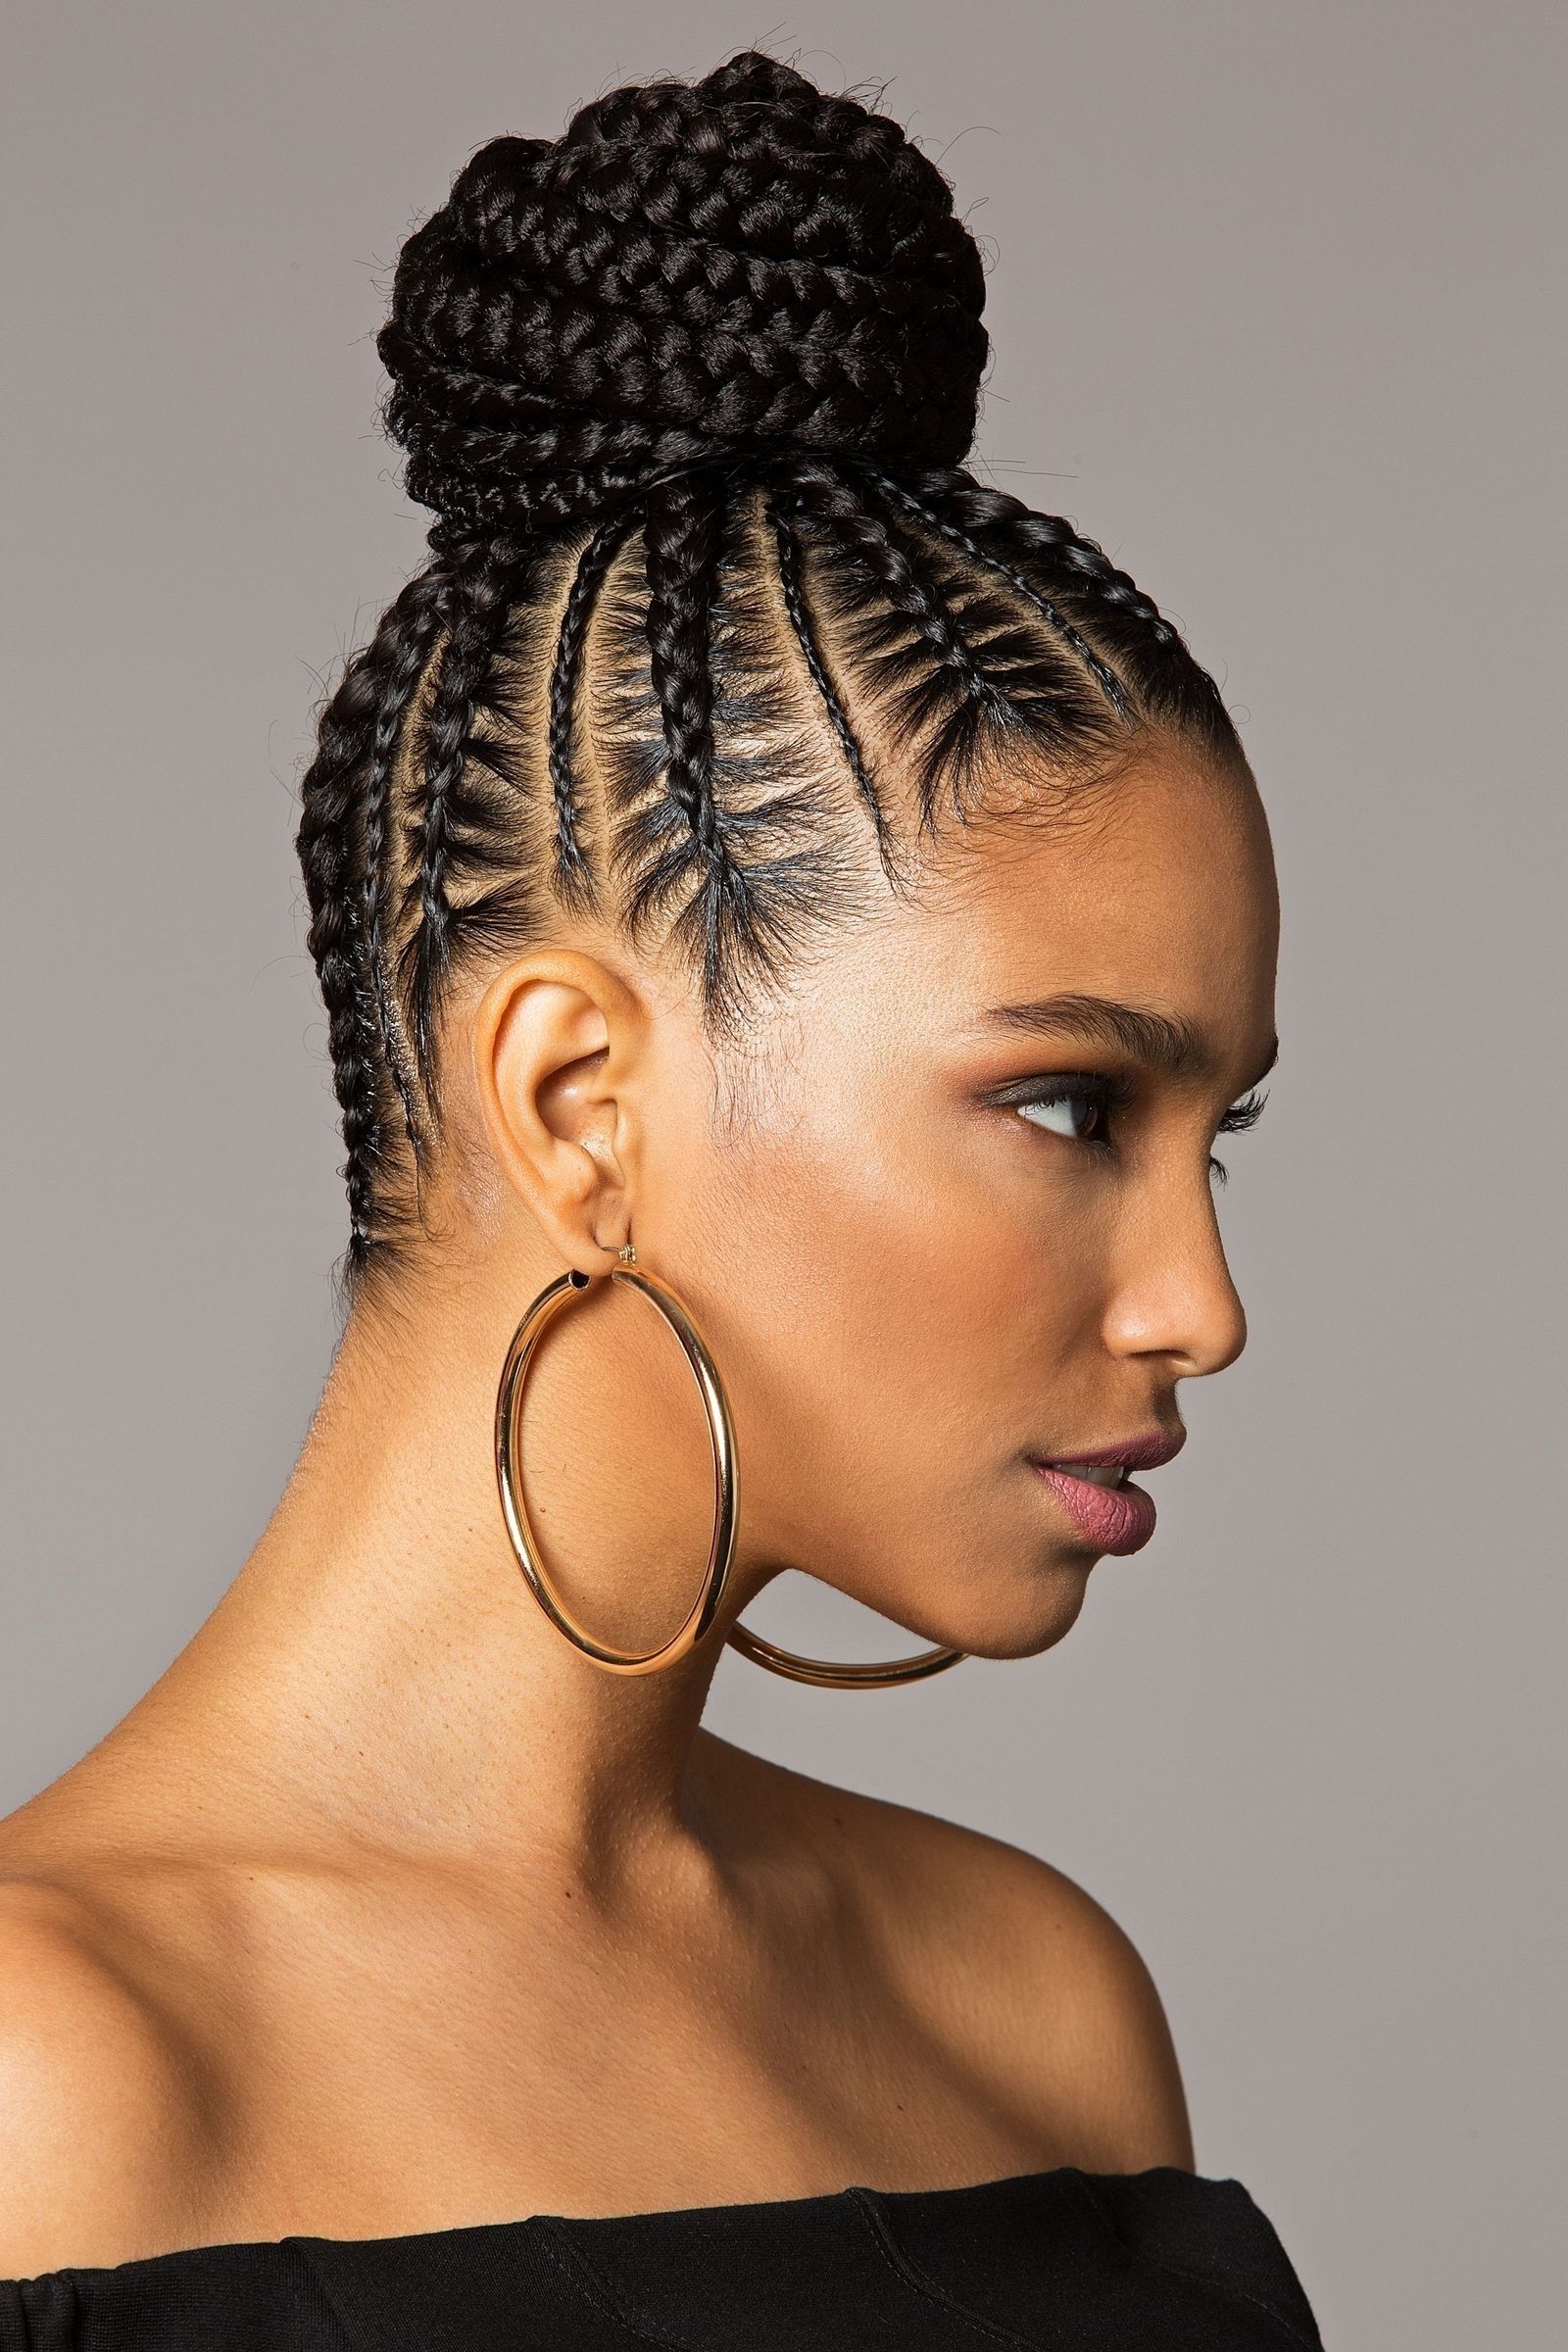 2018 Cornrows Hairstyles With Buns Throughout You're Going To Want To Wear This Bomb Braided Bun All Summer Long (View 1 of 15)